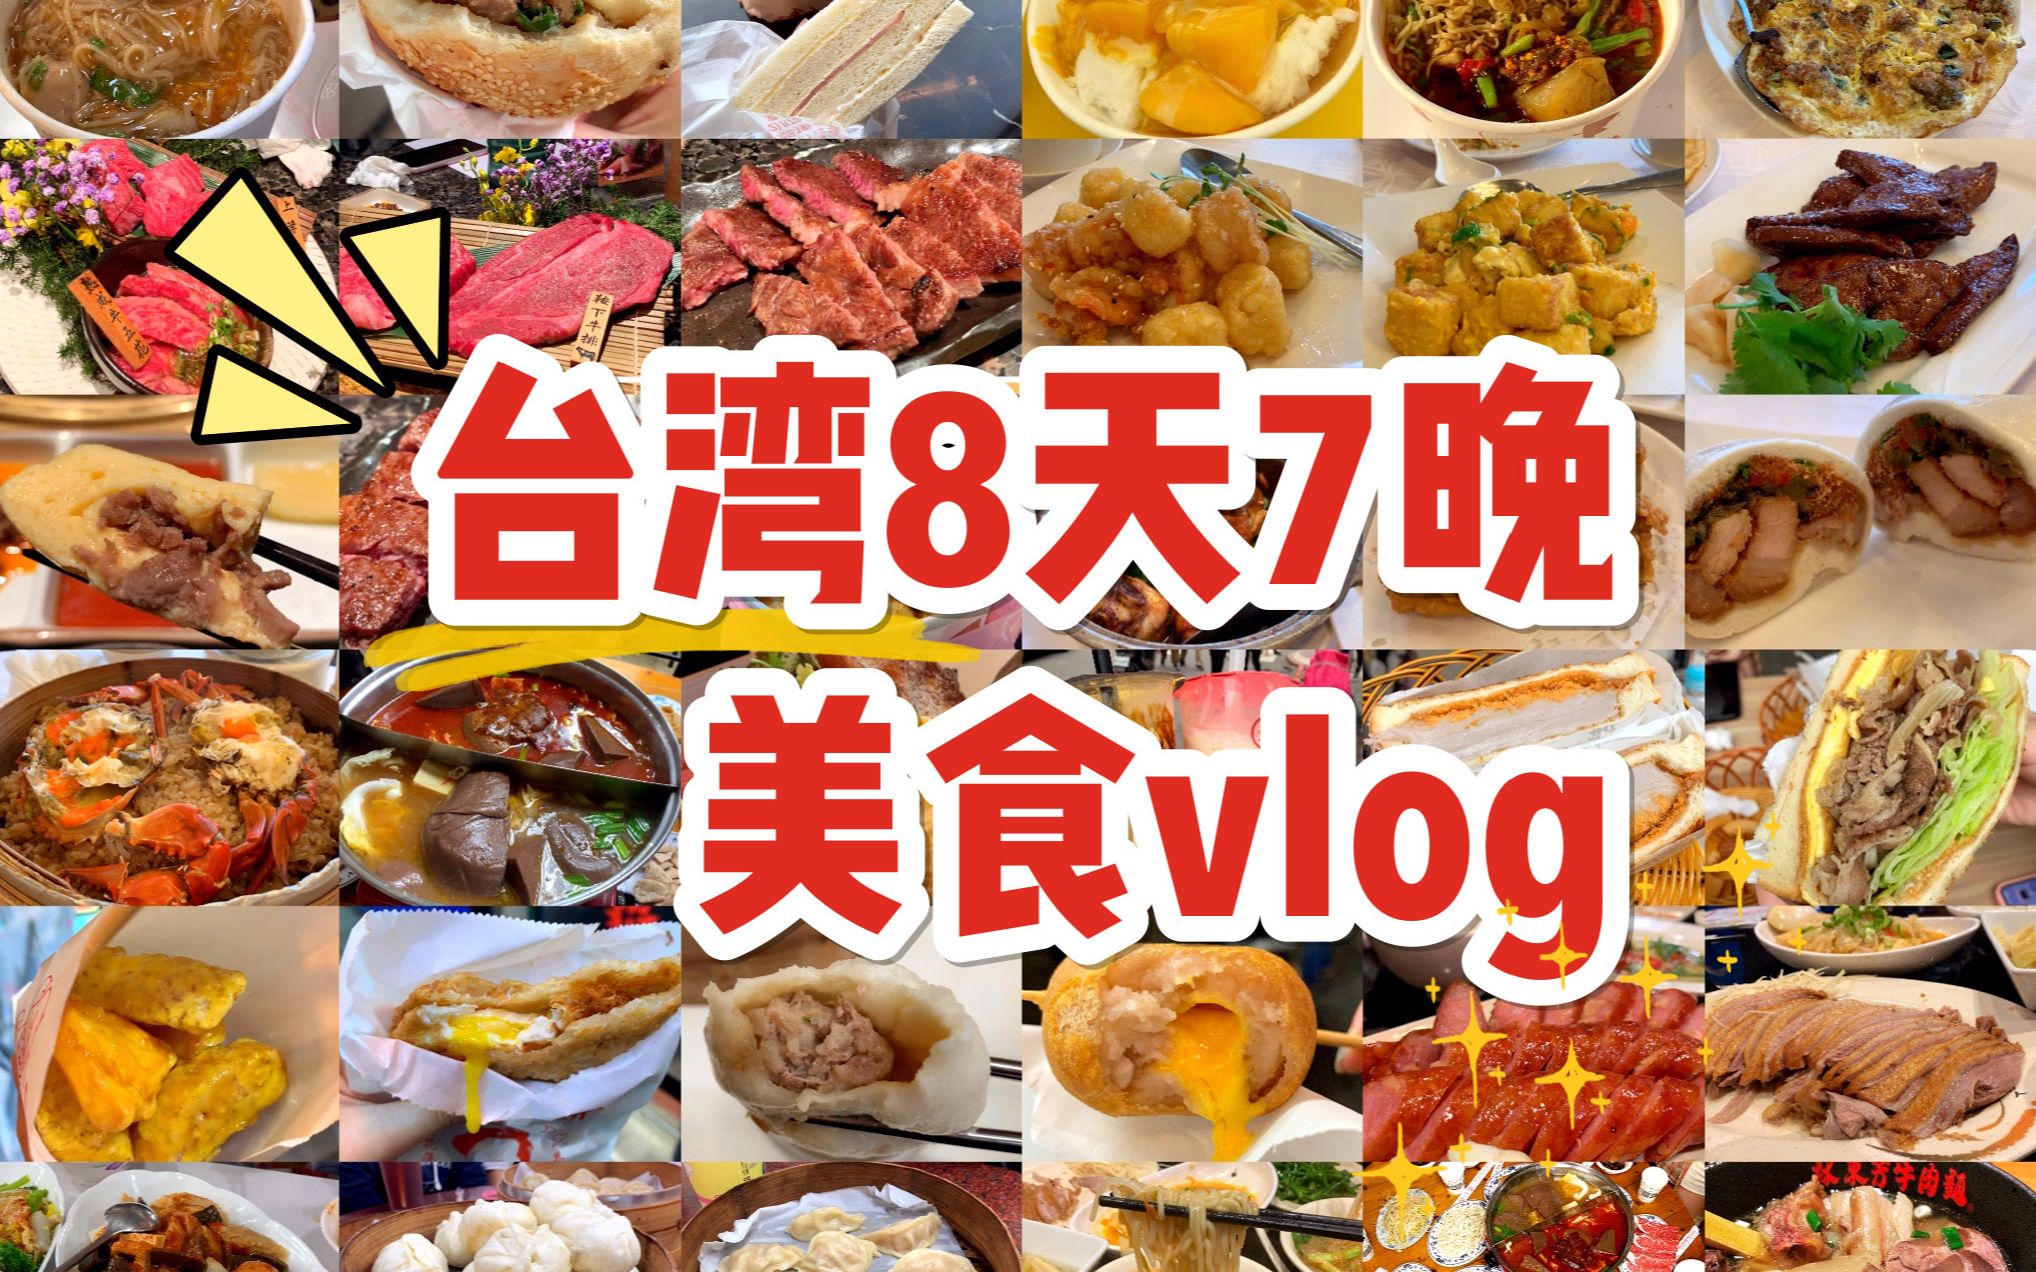 The best Taiwanese food - ultimate Taiwan food guide - CK Travels